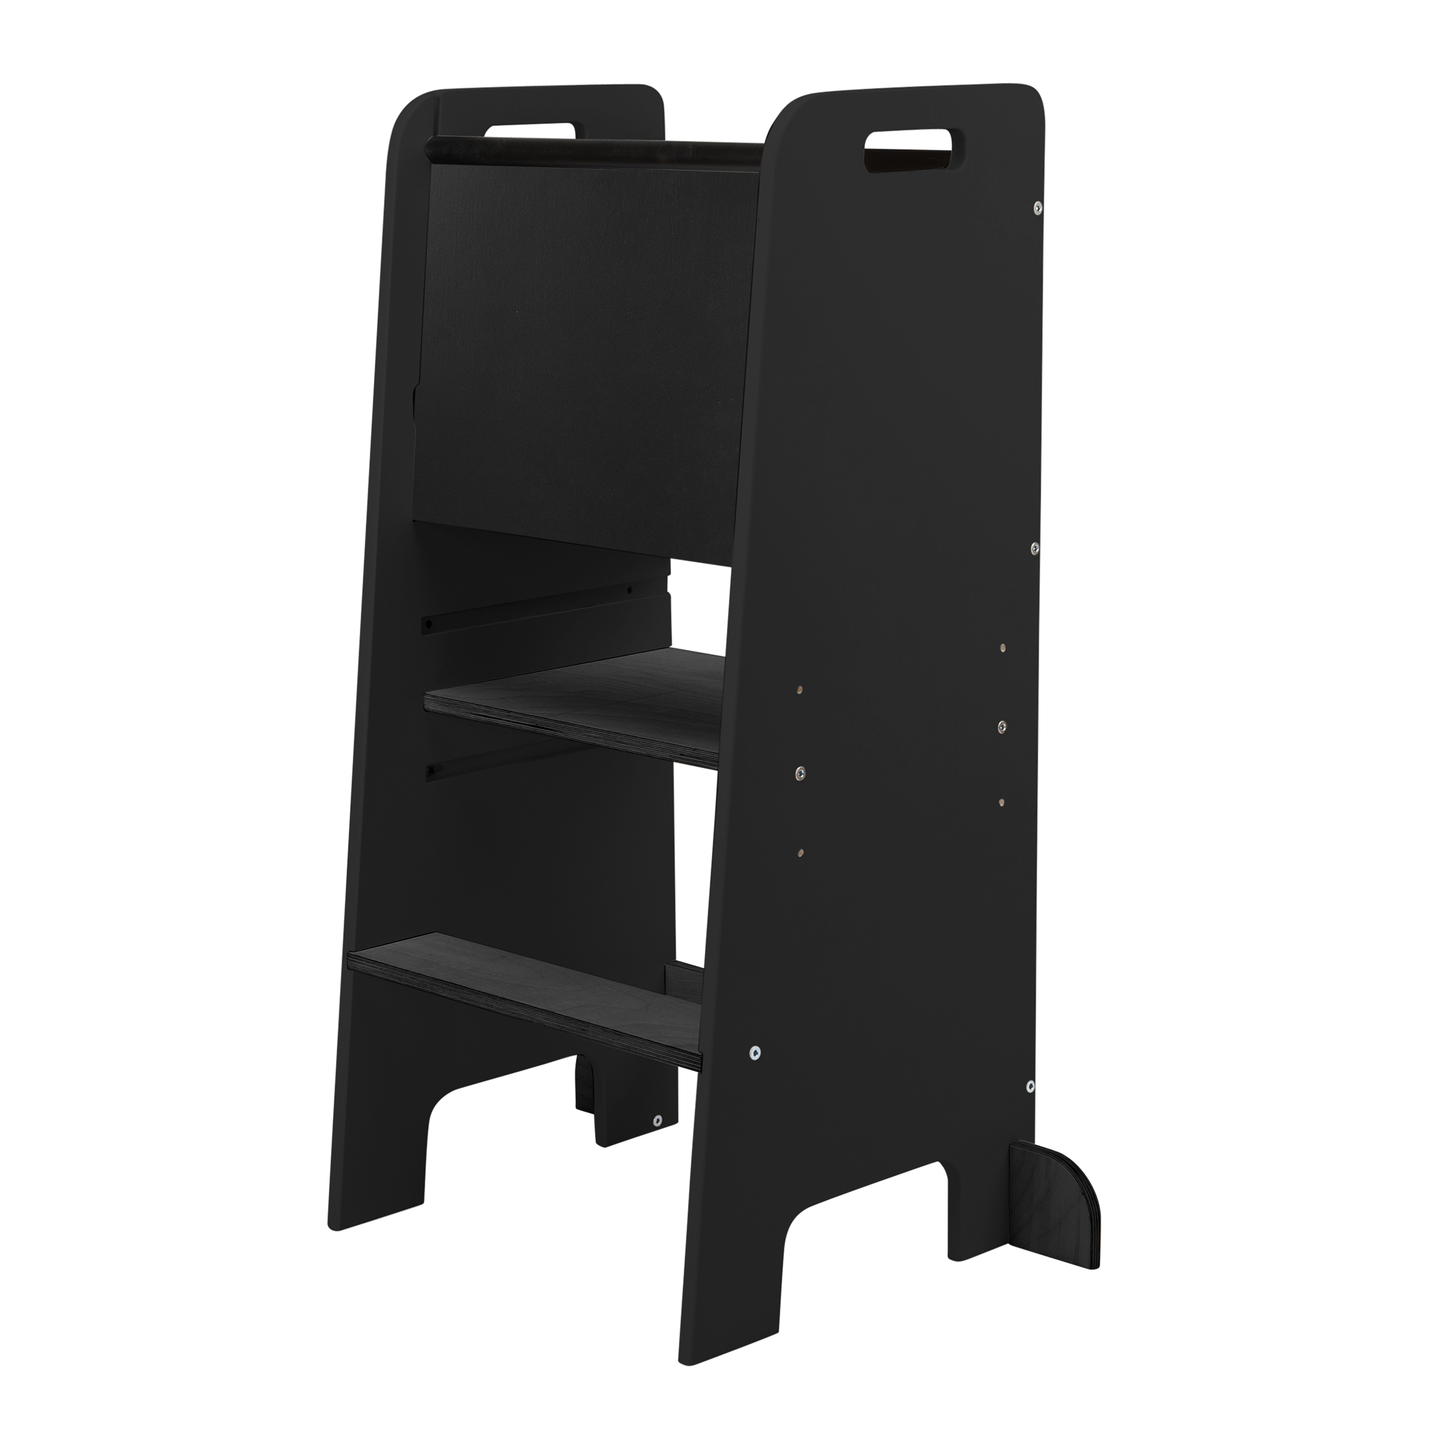 Super Safe Adjustable height Learning Tower KNEL2ss